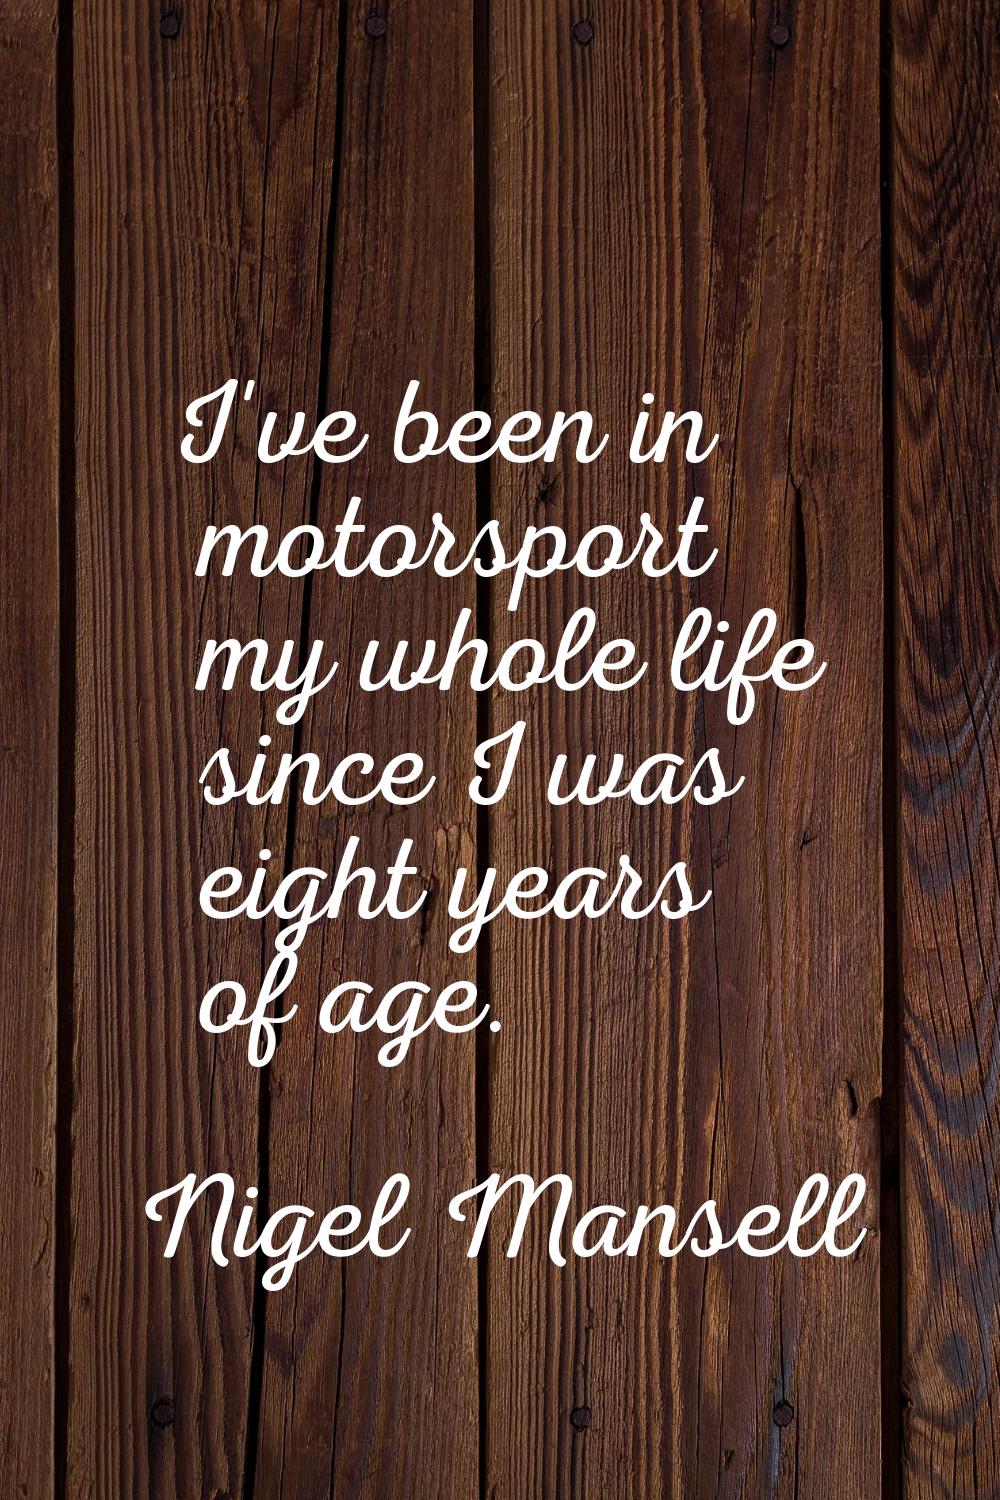 I've been in motorsport my whole life since I was eight years of age.